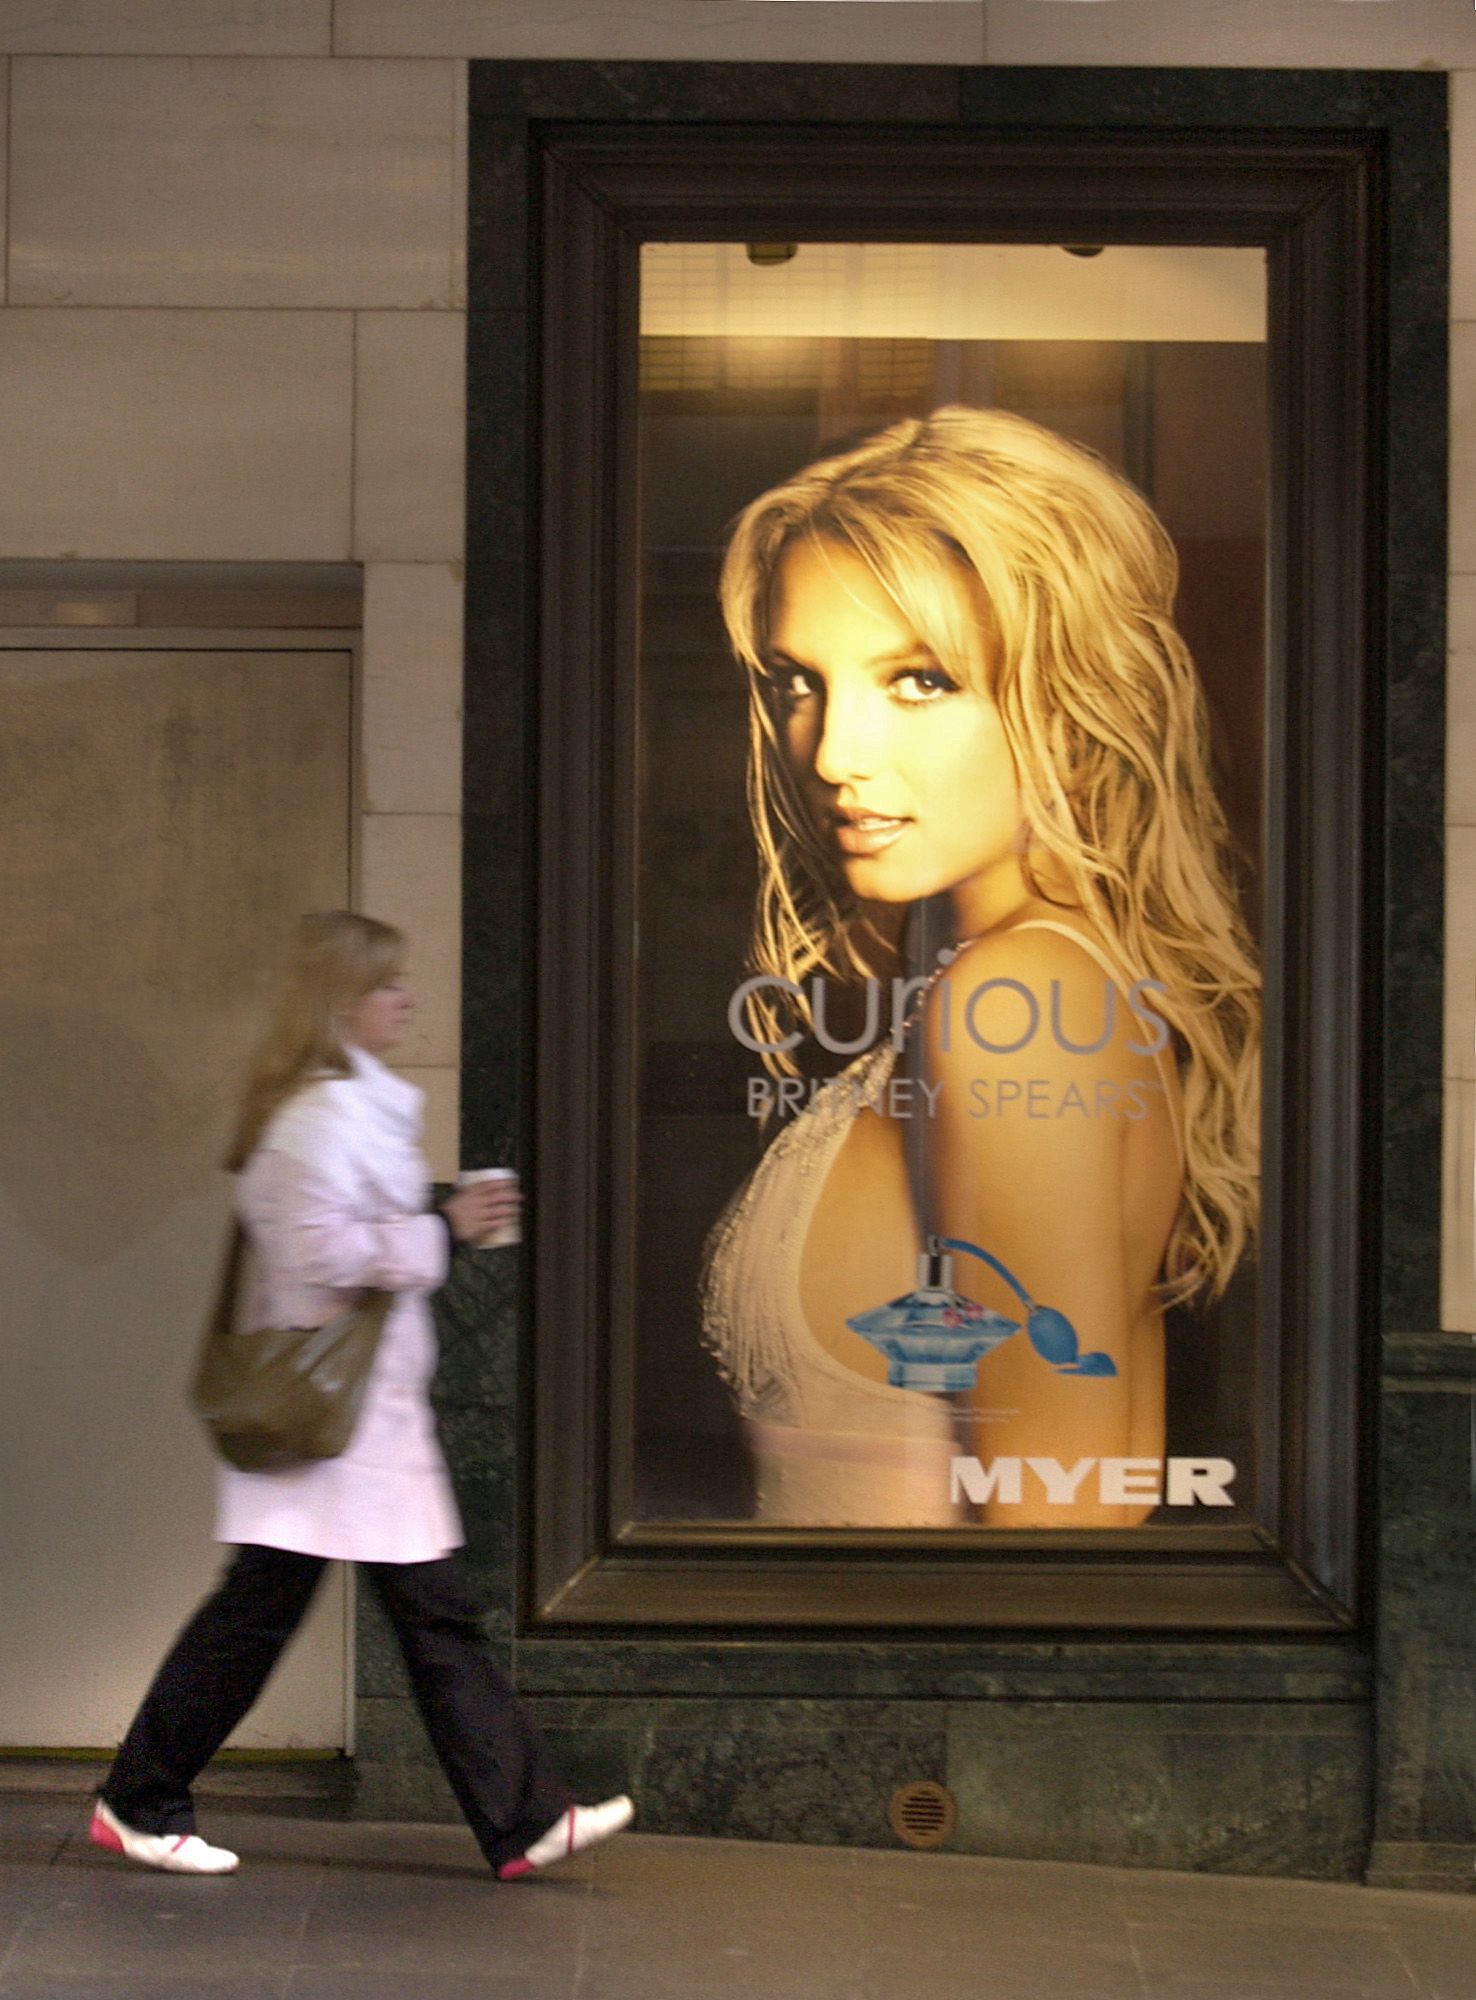 A woman walks by an advertisement showing singer Brittany Spears on display at a Coles Myer department store in Sydney, Australia on Tuesday 12 July, 2005. Coles Myer Ltd., Australia's biggest retailer, agreed to sell its Myer department stores to a group led by buyout firm Newbridge Capital LLC for A$1.4 billion ($1 billion) to focus on its larger supermarkets business.  Photographer: Jack Atley/Bloomberg News